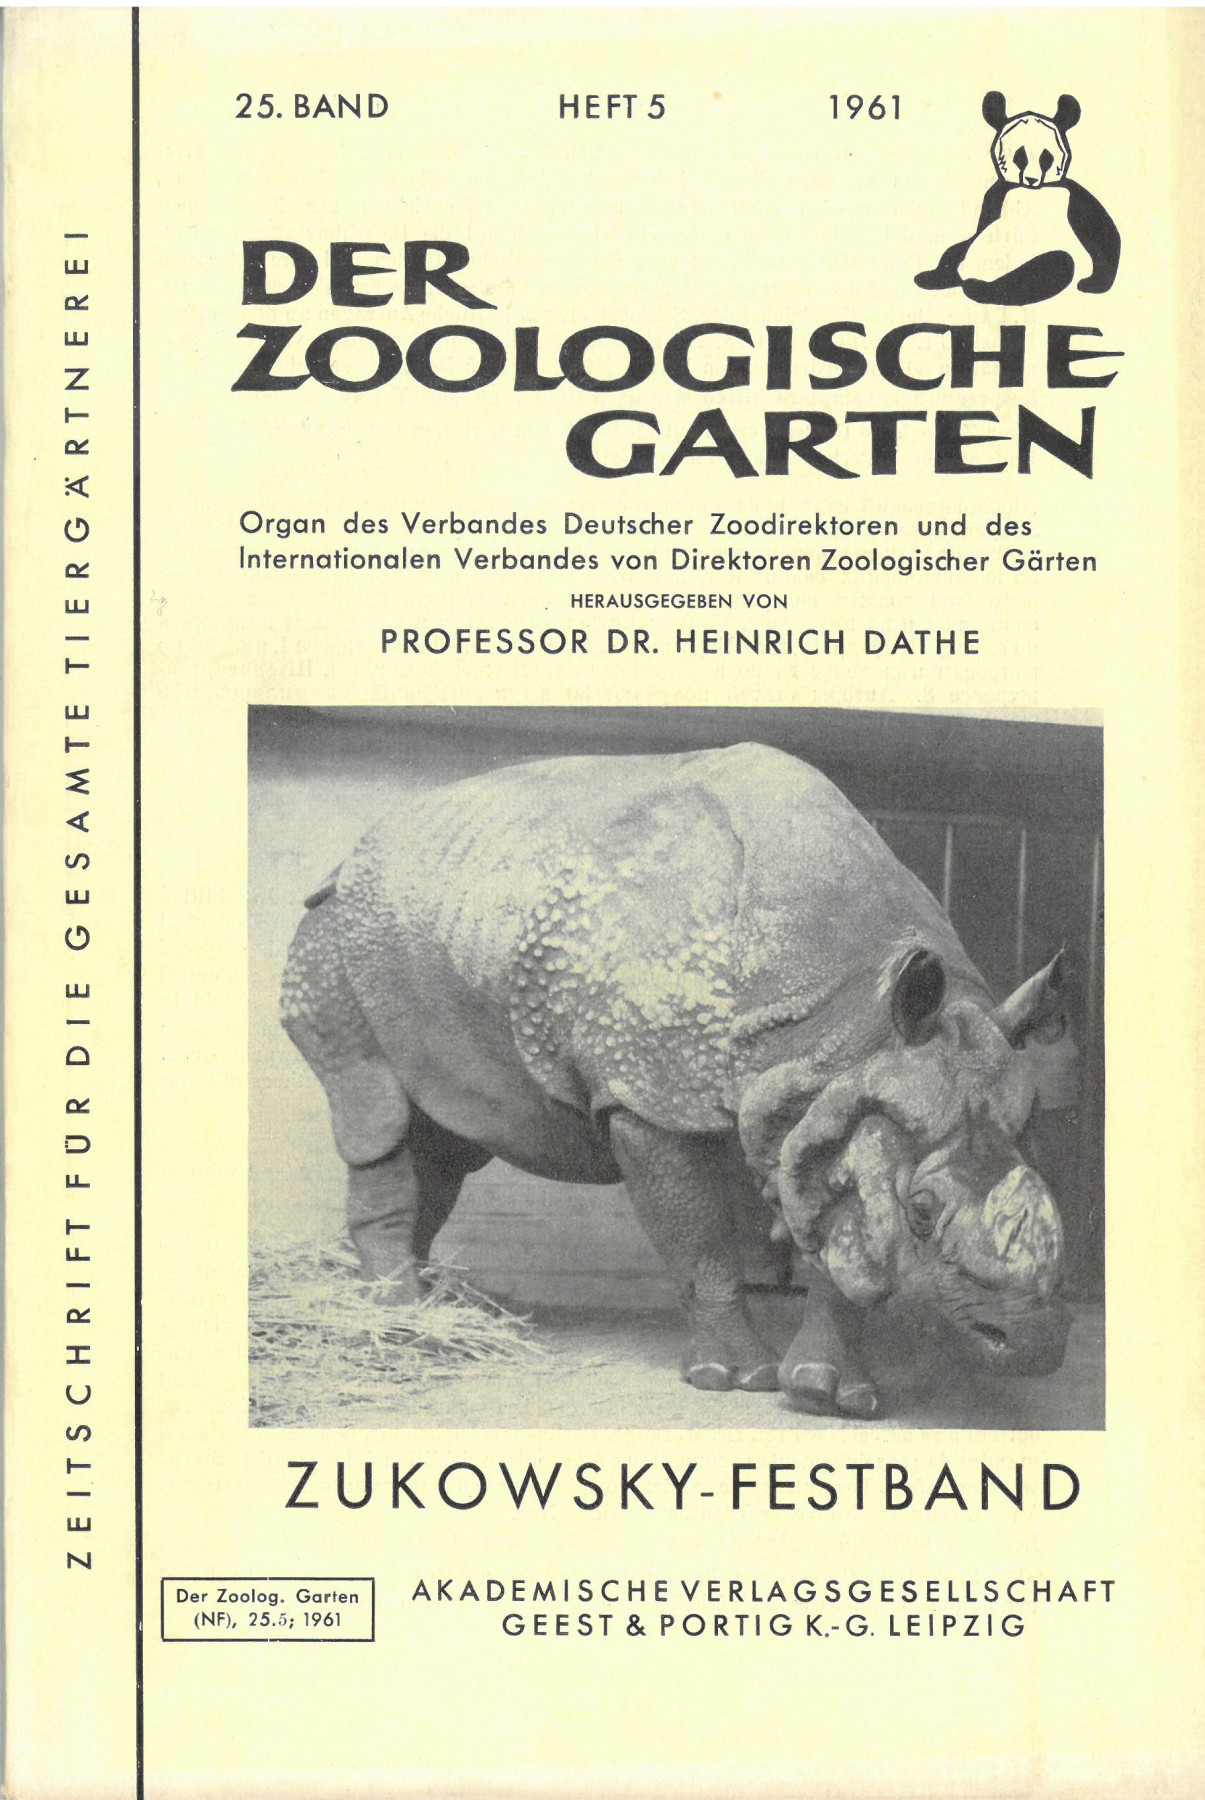 Cover page of Der Zoologische Garten with photograph of a rhinoceros